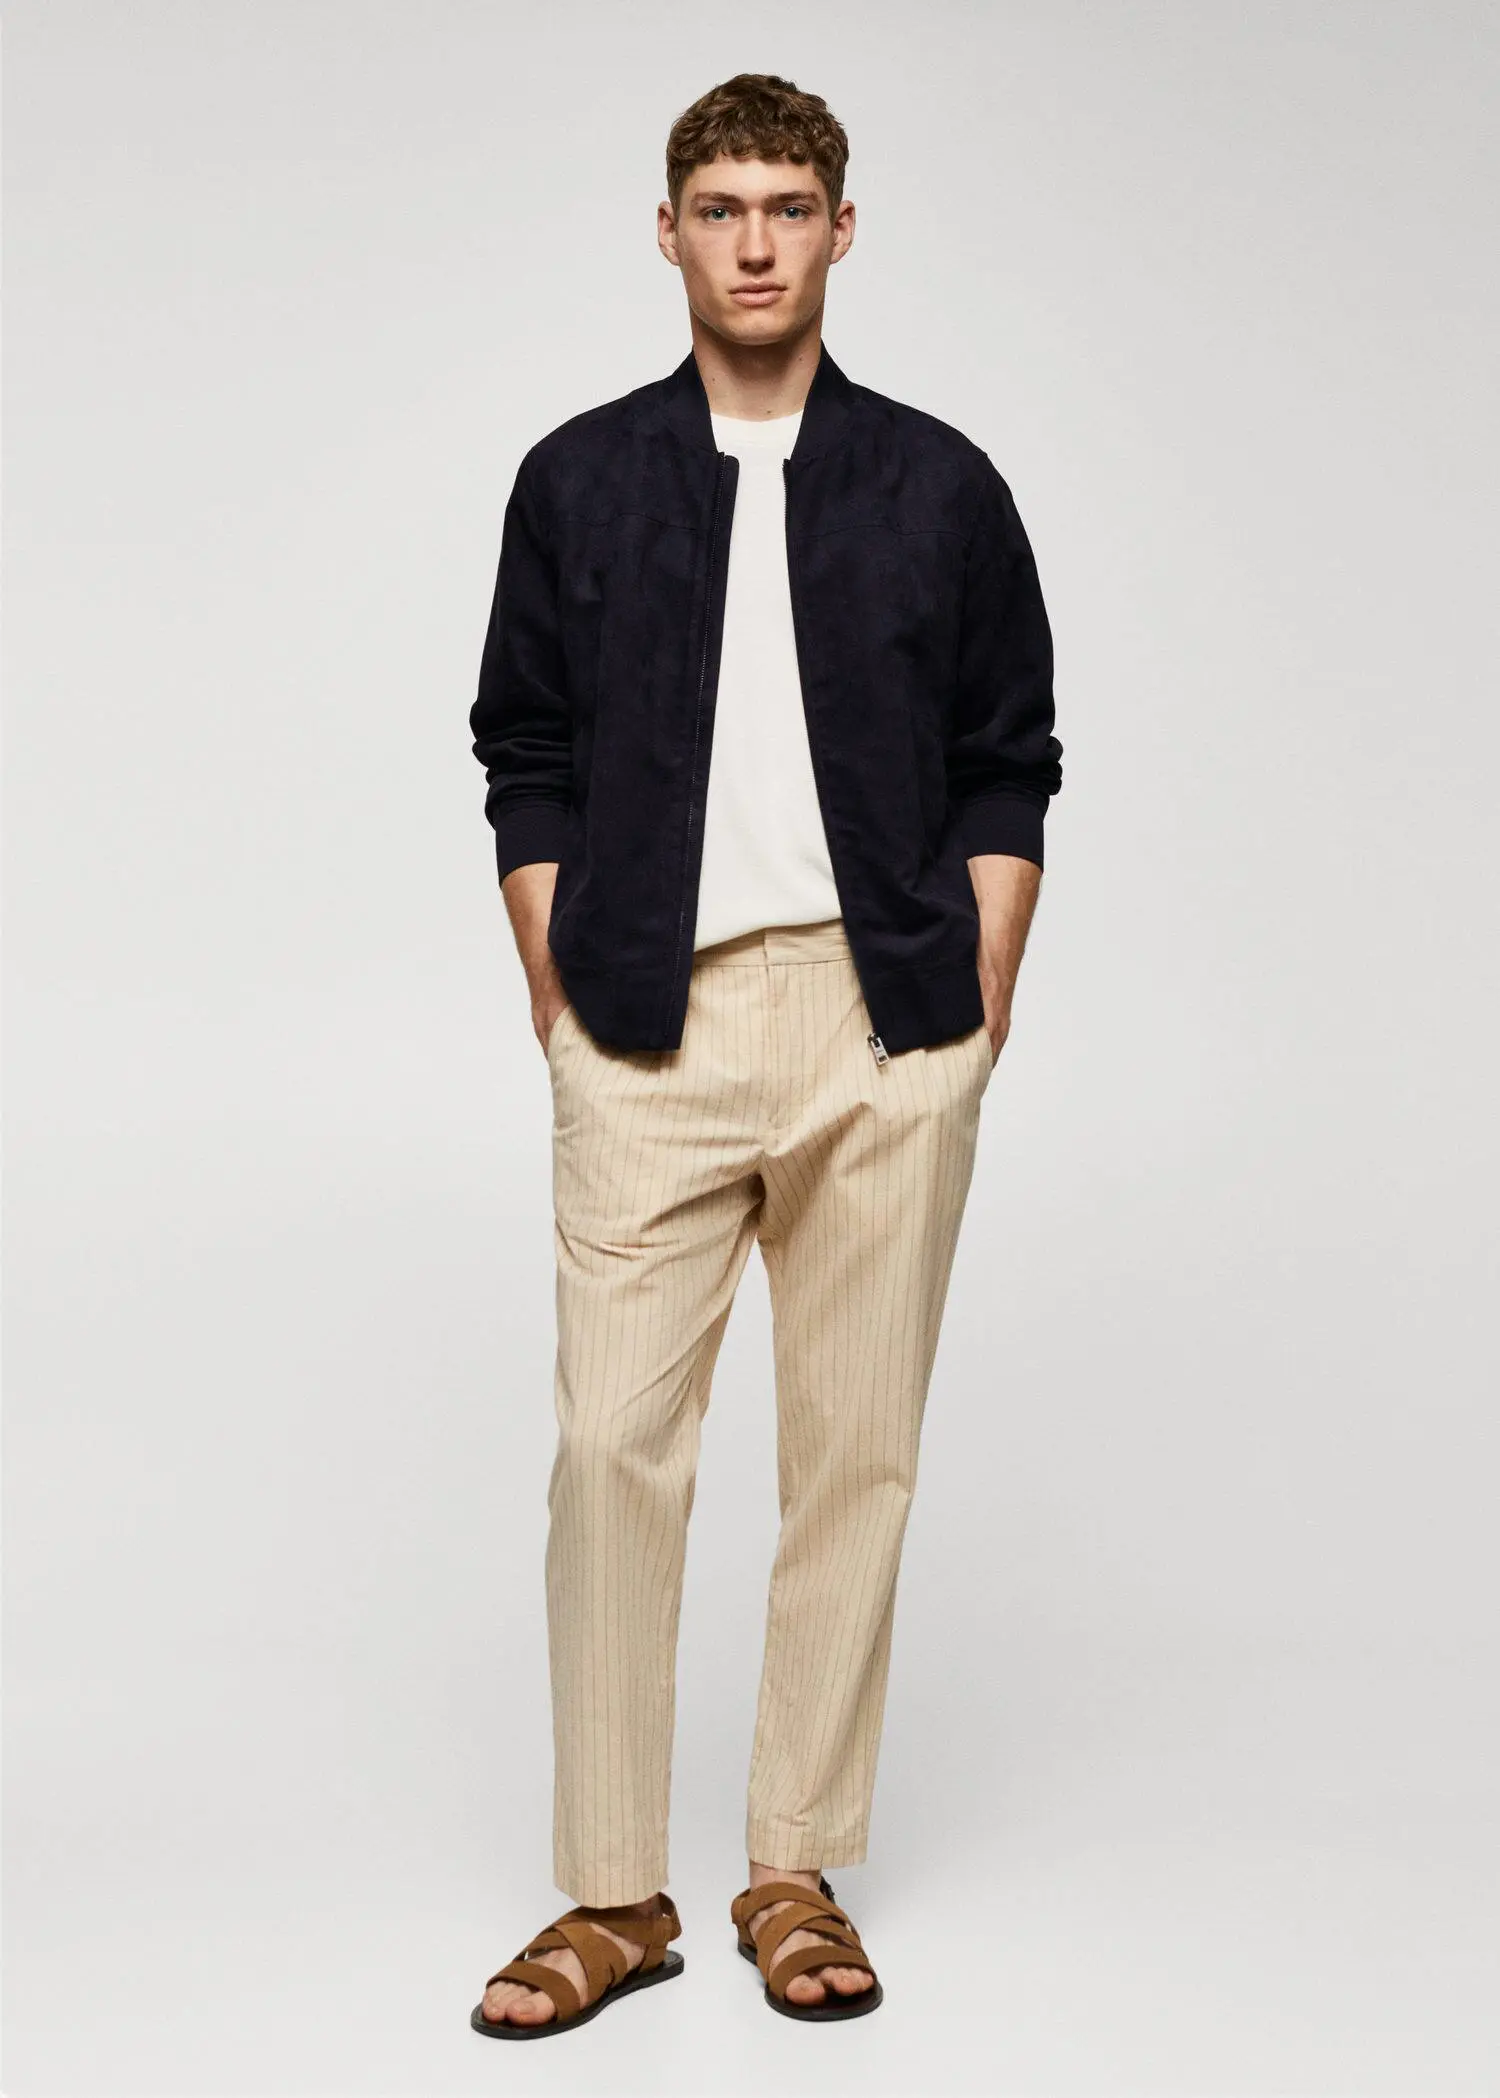 Mango Suede-effect bomber jacket. a man wearing a black jacket and beige pants. 